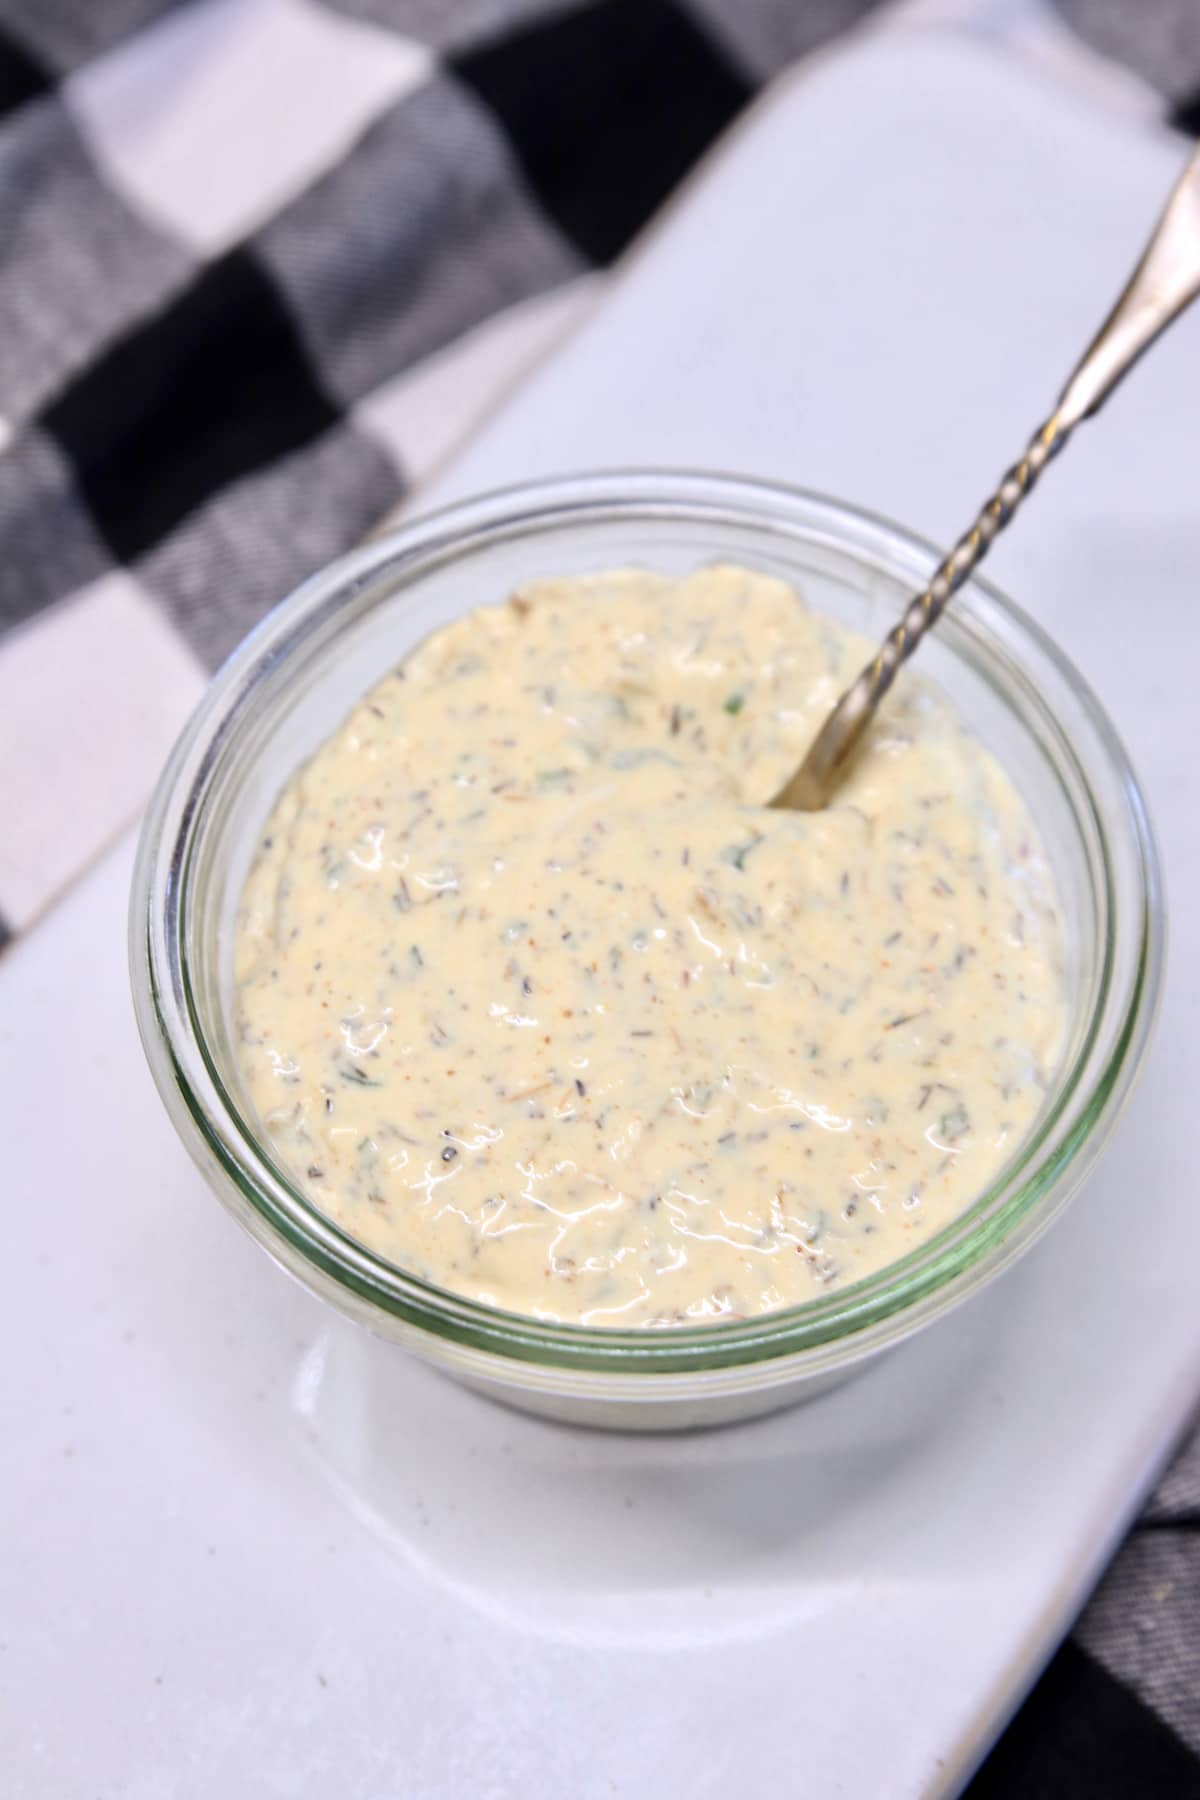 Bowl of garlic cream sauce with a small spoon.